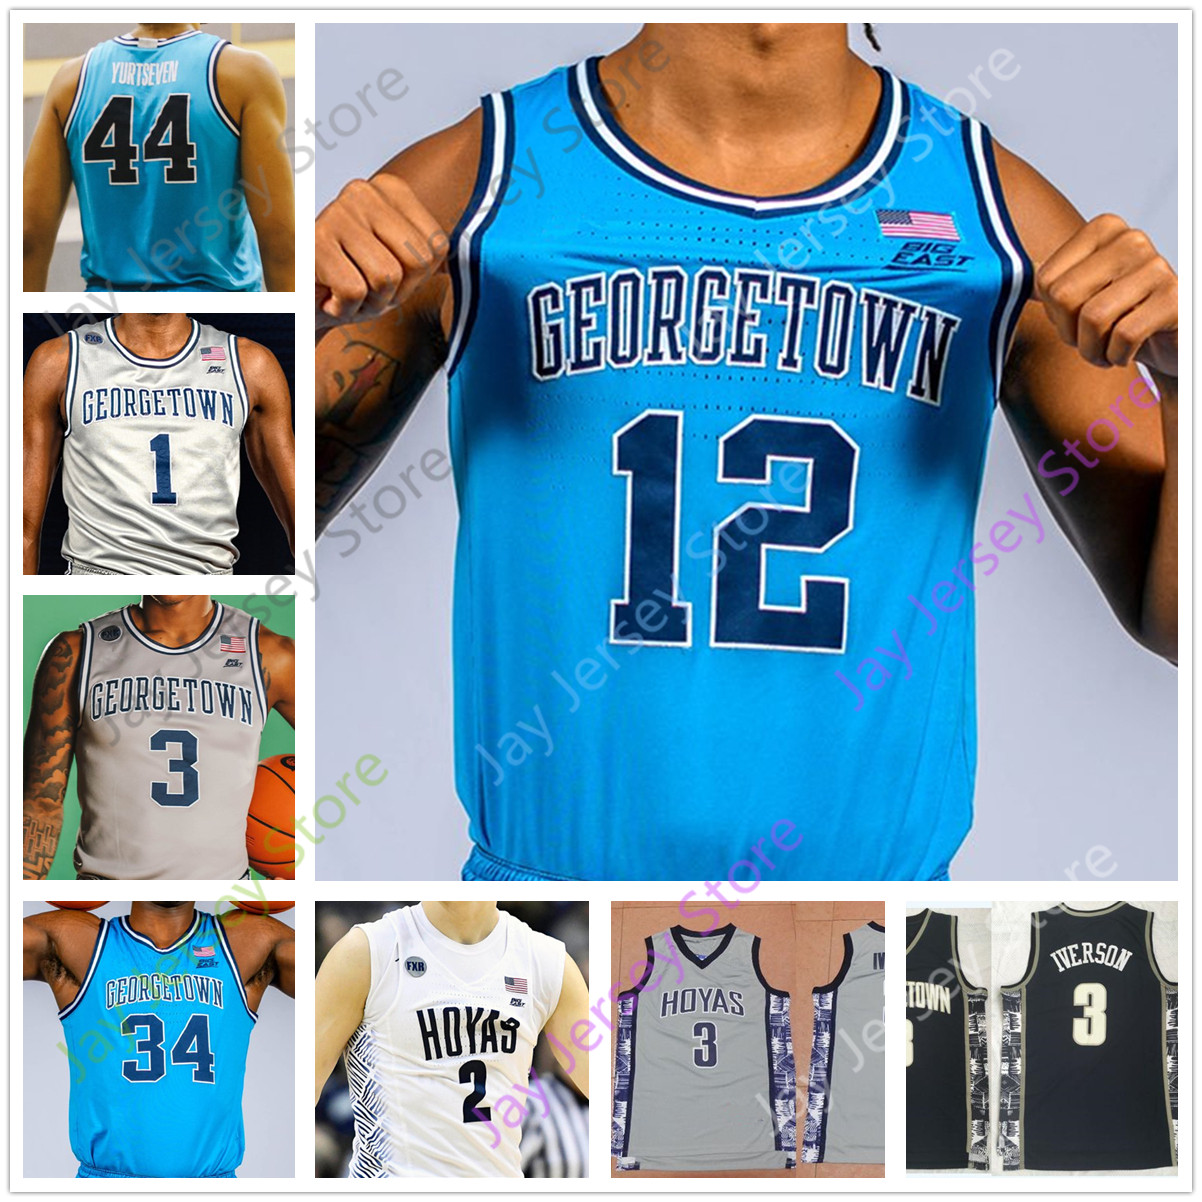 mac mcclung jersey for sale